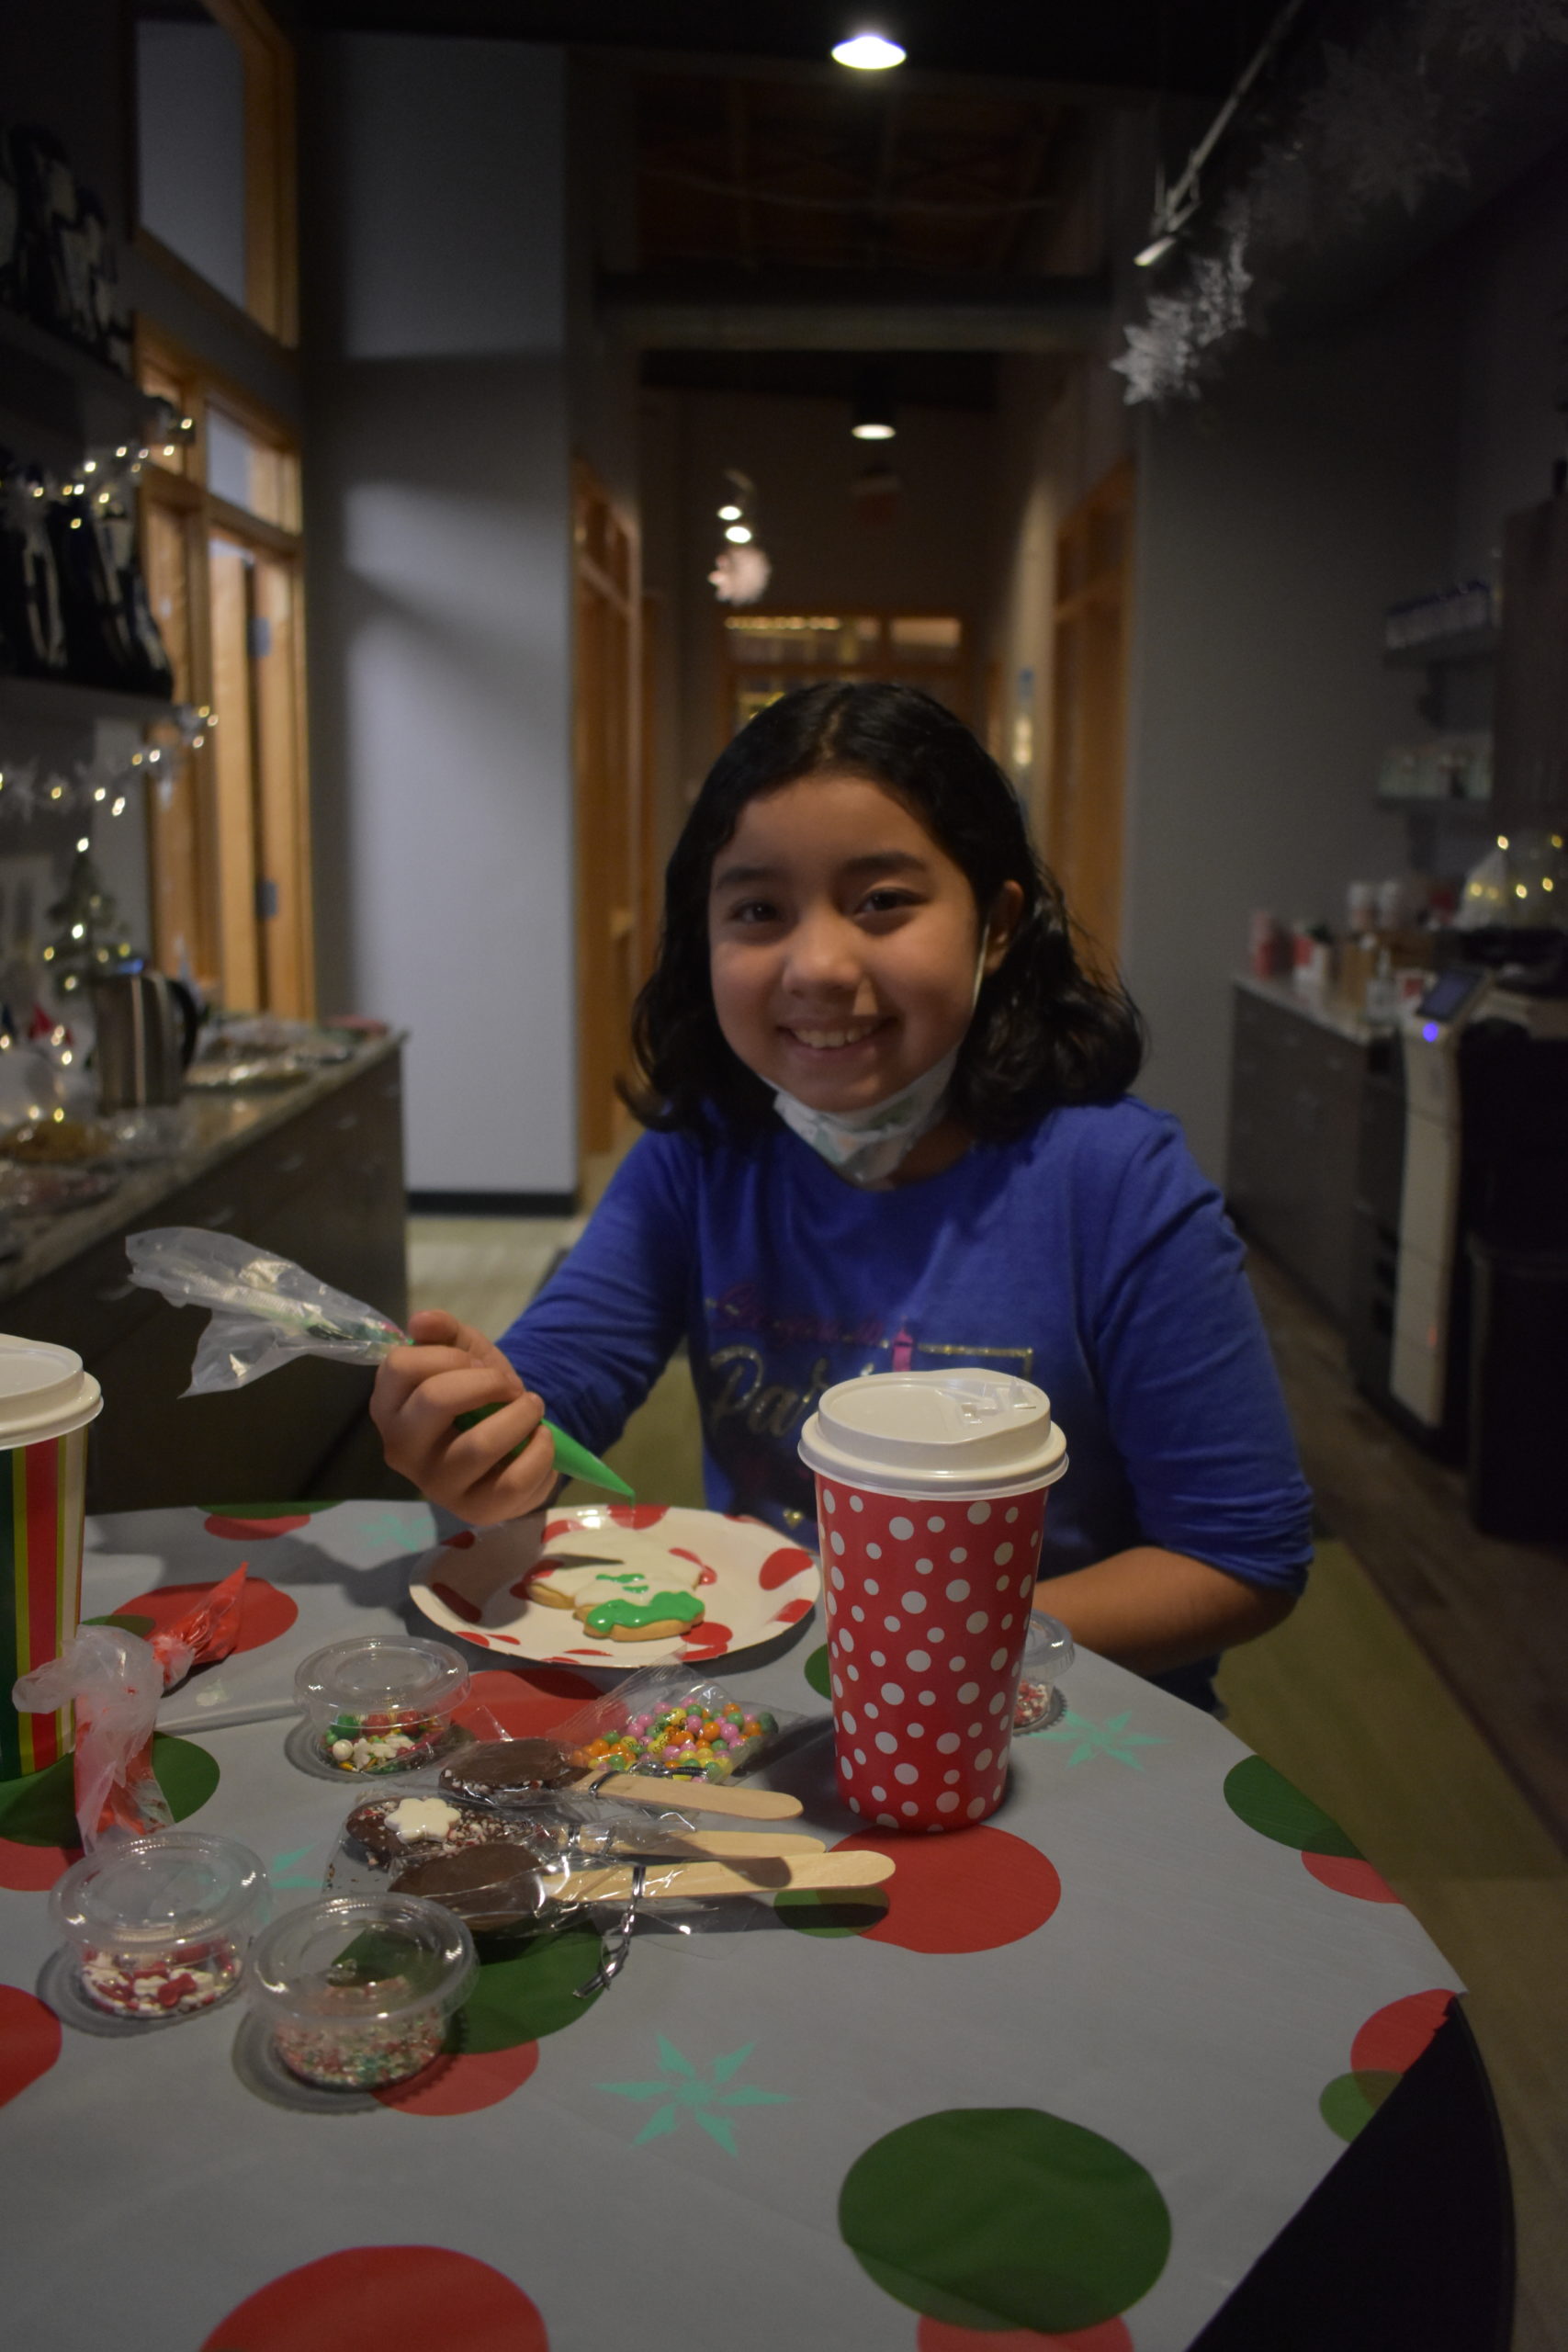 A girl sitting at a table making a craft at a holiday party